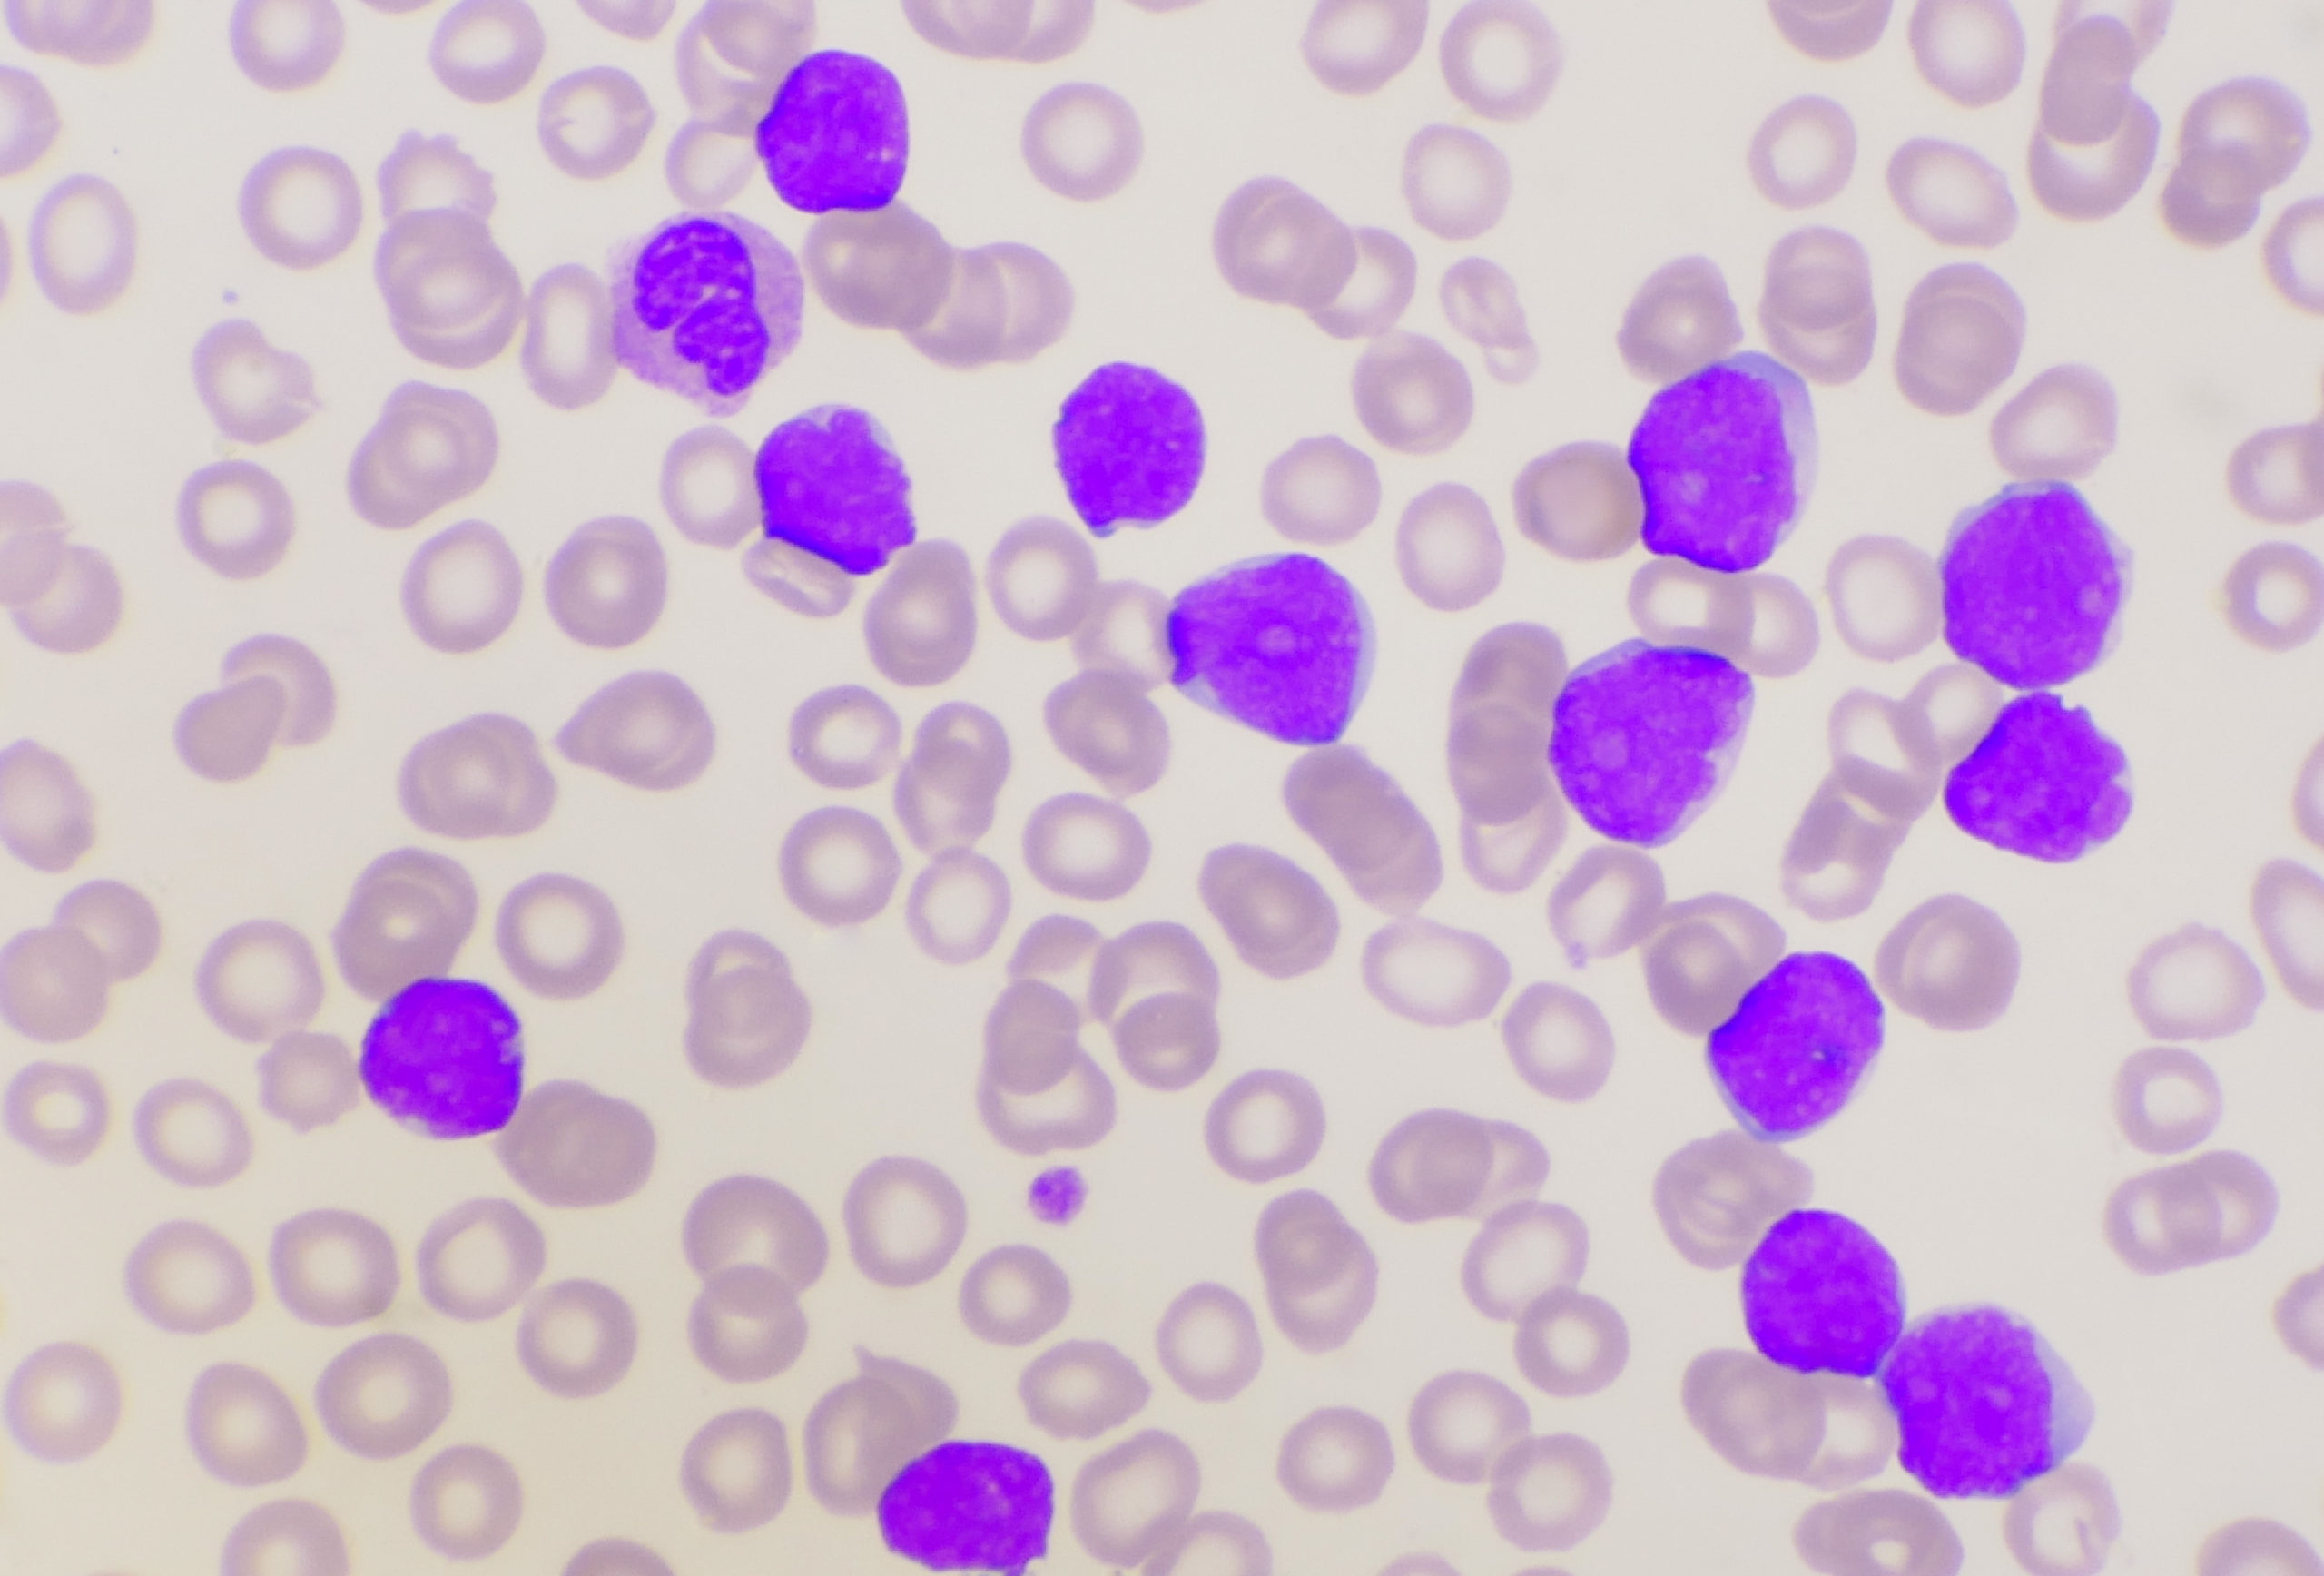 Magrolimab Added to Azacitidine With Venetoclax Promising in Newly Diagnosed, High-Risk Acute Myeloid Leukemia